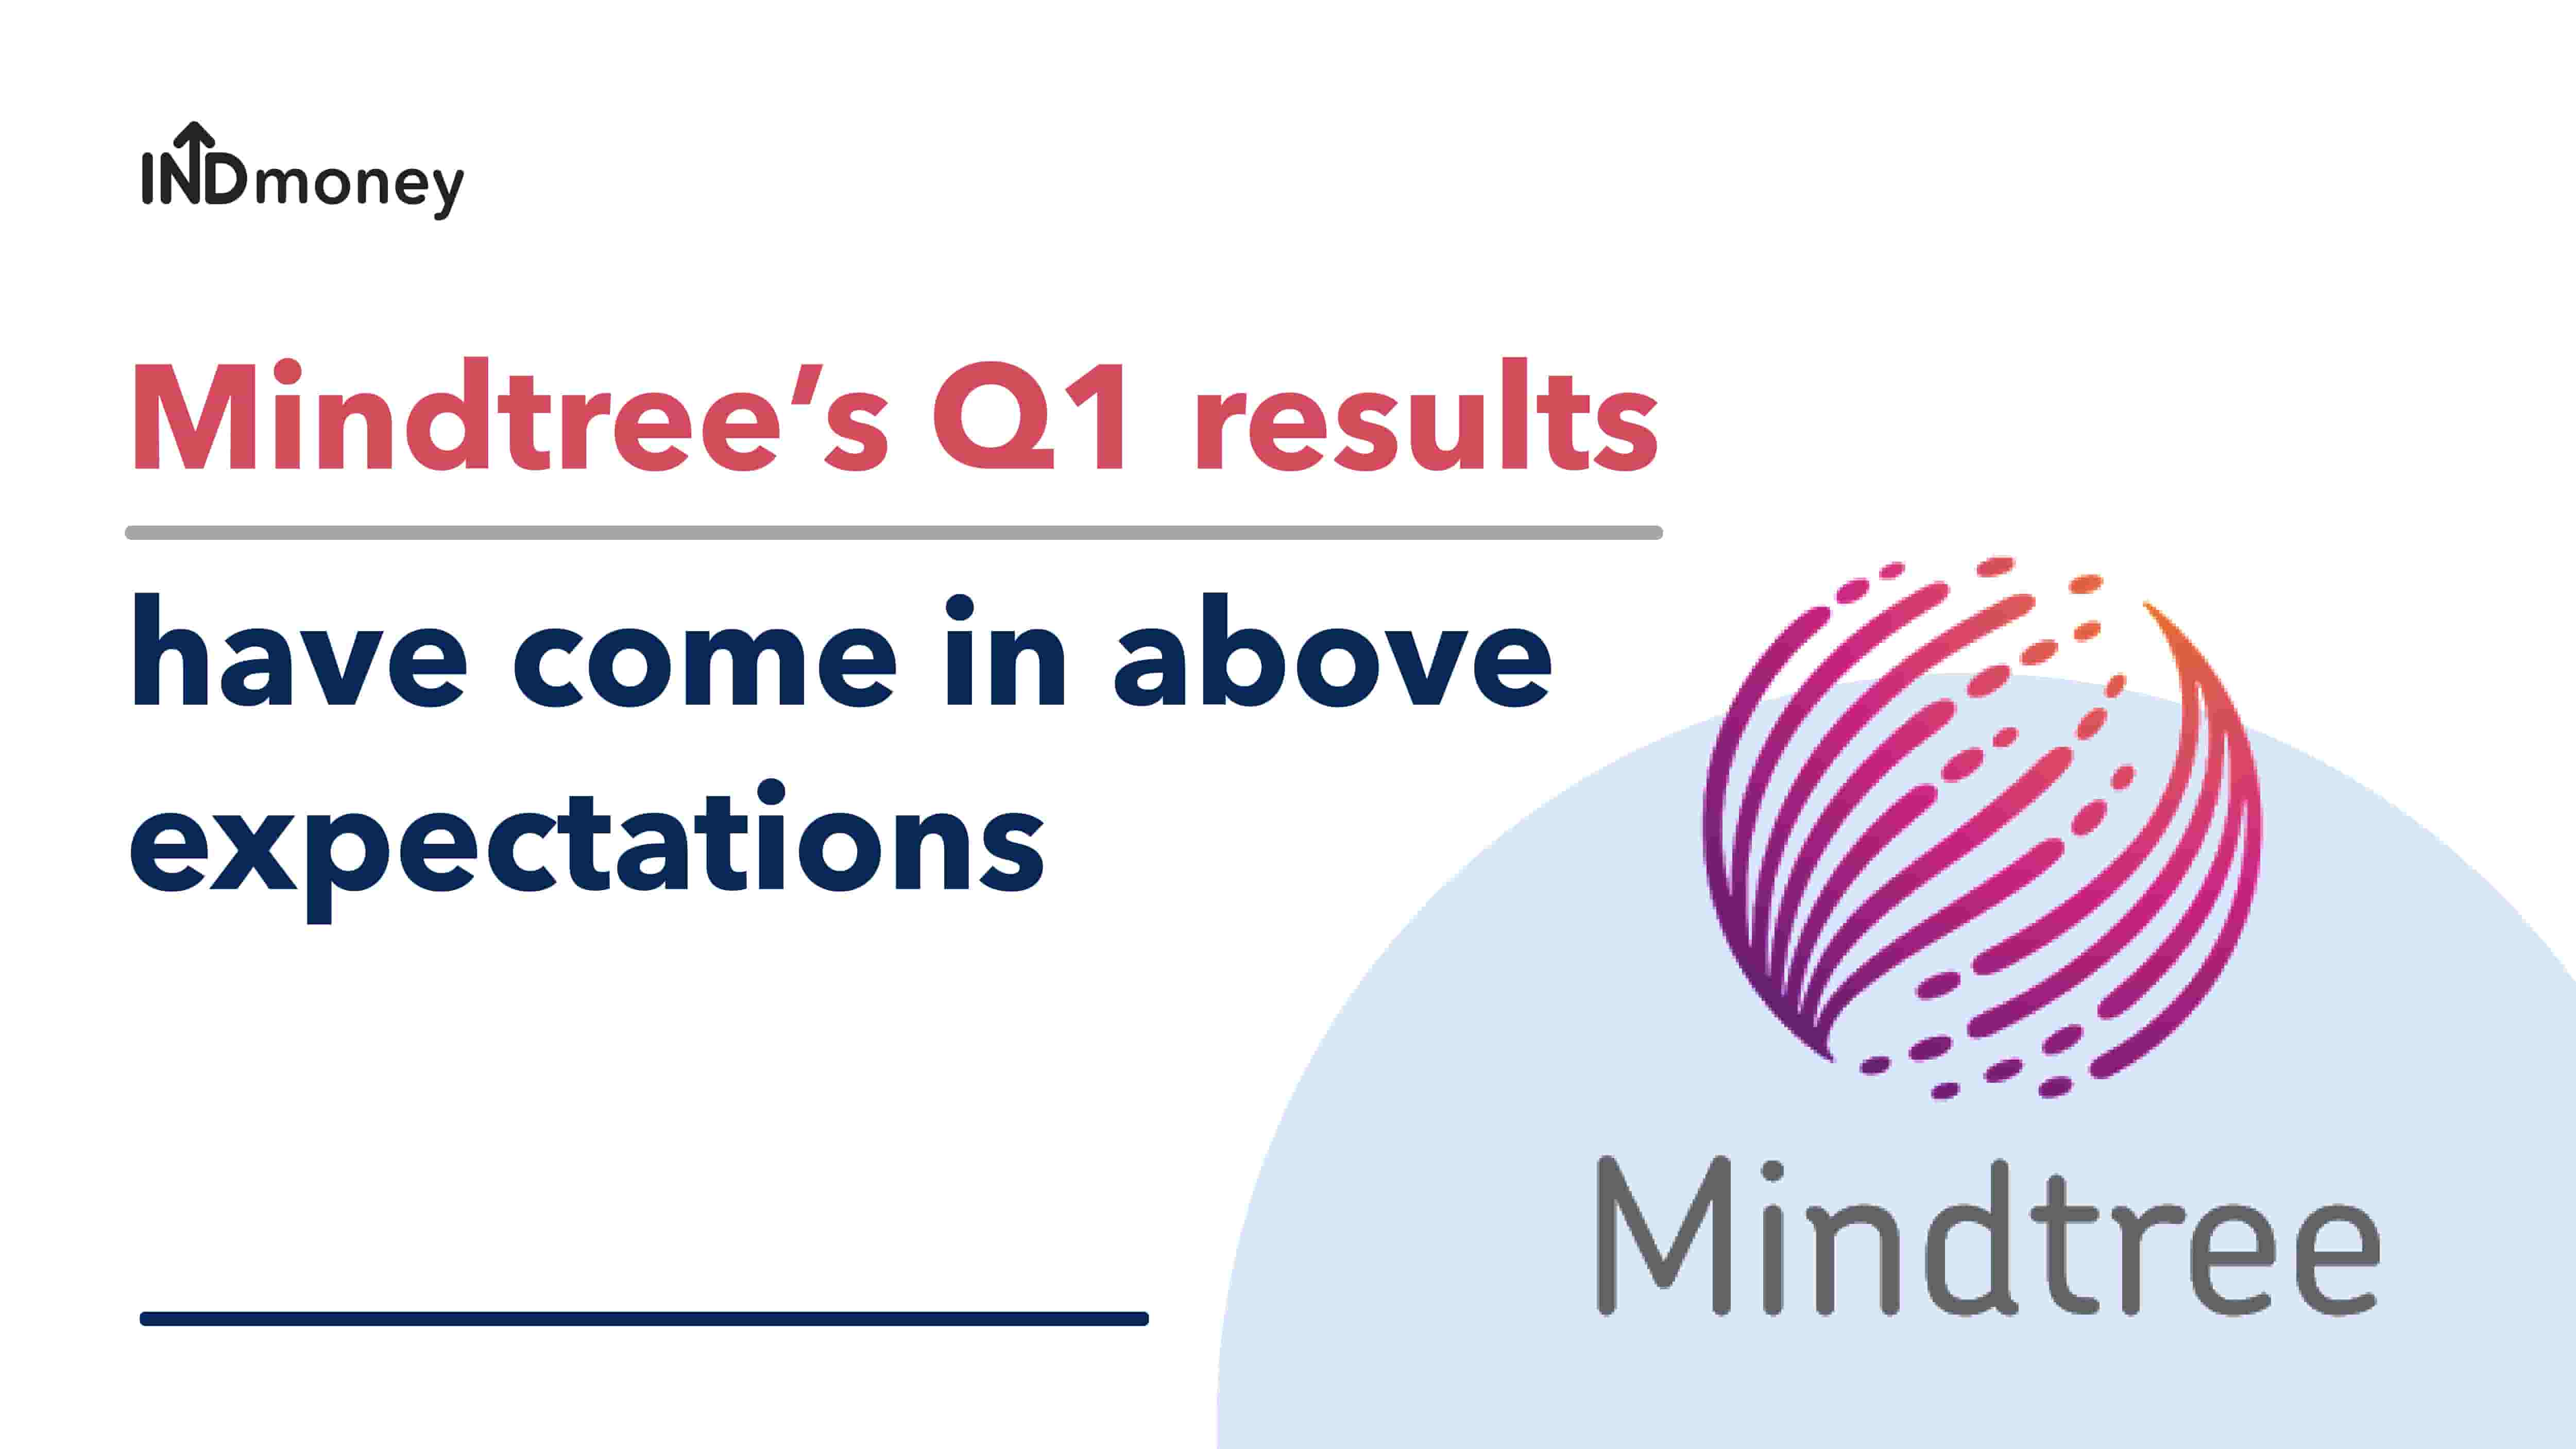 Mindtree Results: Mindtree Quarterly Results for Q1, Earnings, News & More